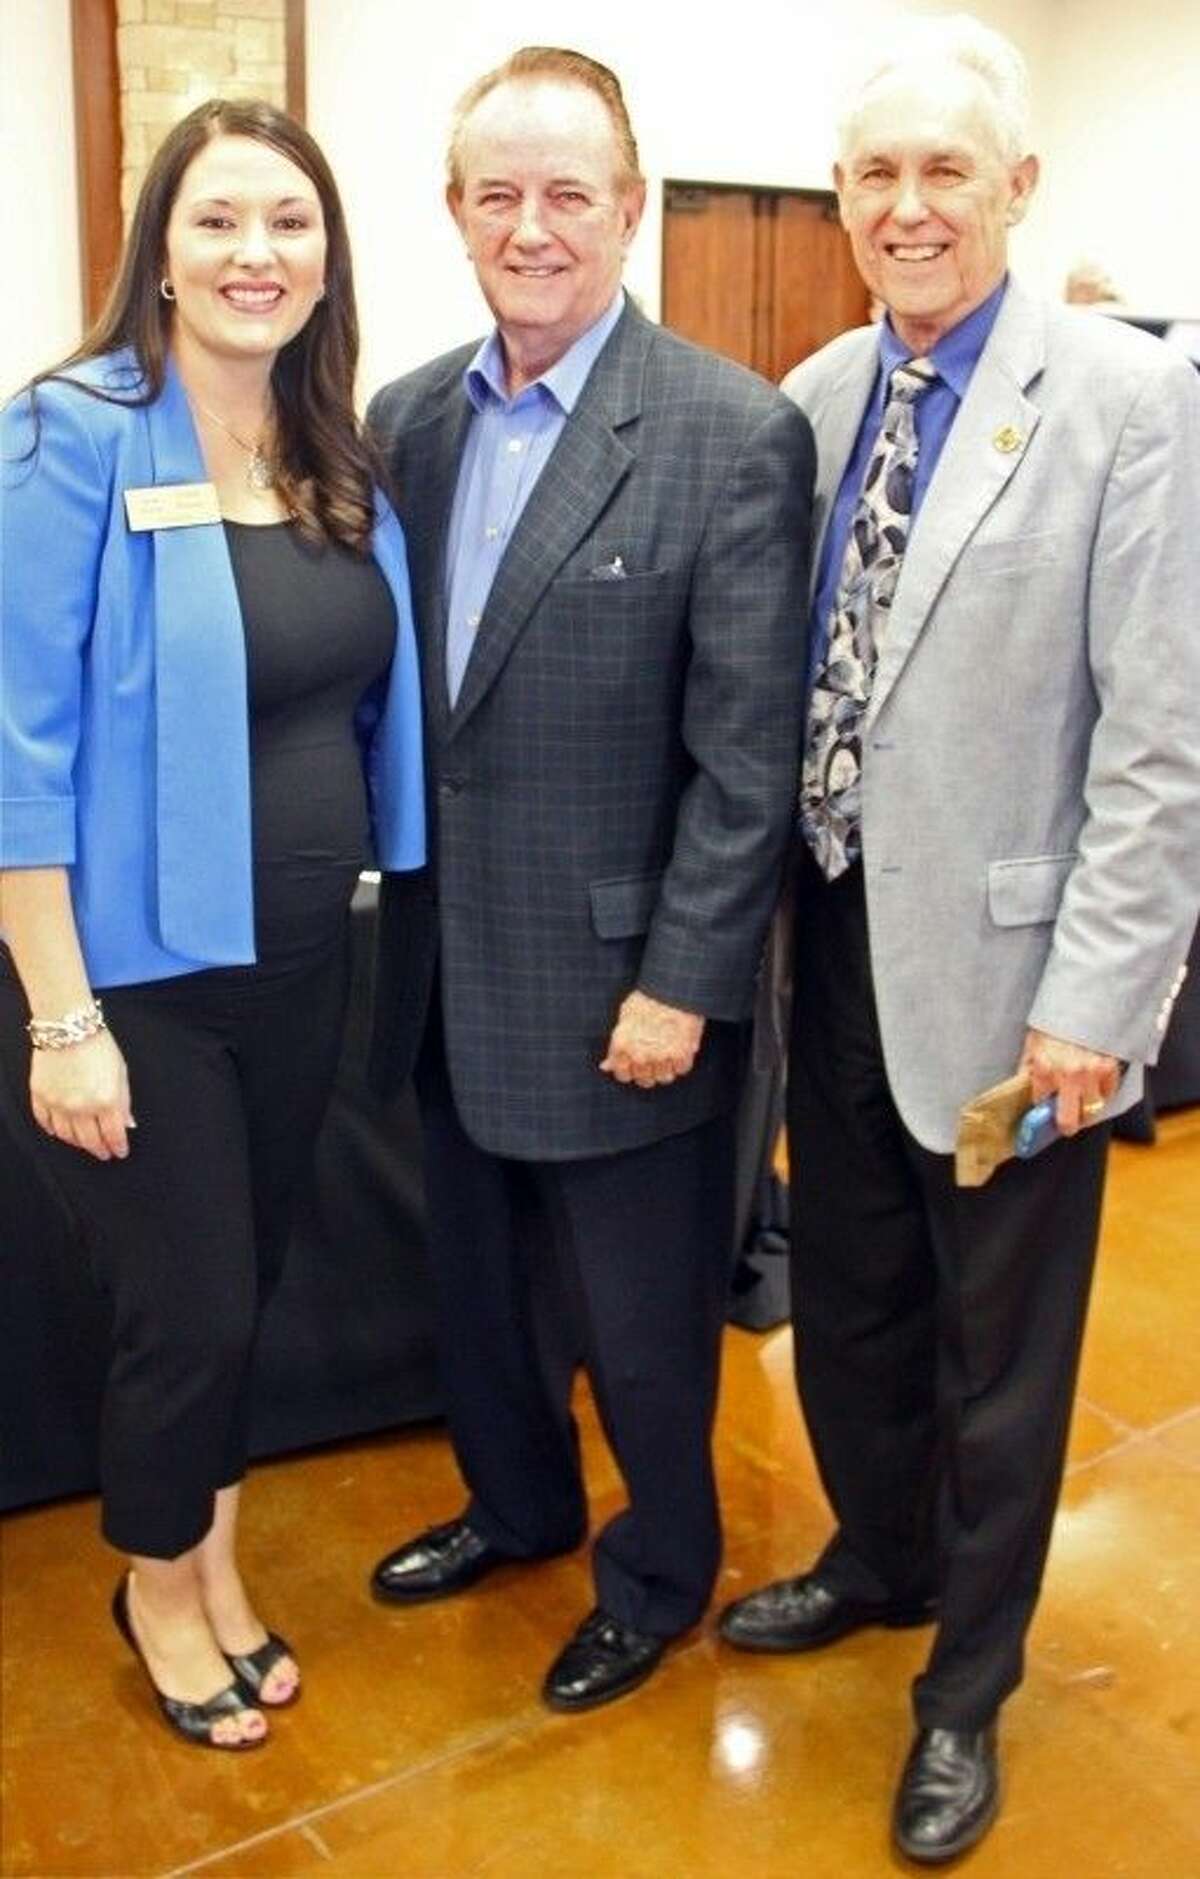 Richard Scott, right, is shown with Pasadena Chamber of Commerce President/CEO Cristina Womack and Mayor Johnny Isbell in 2015.